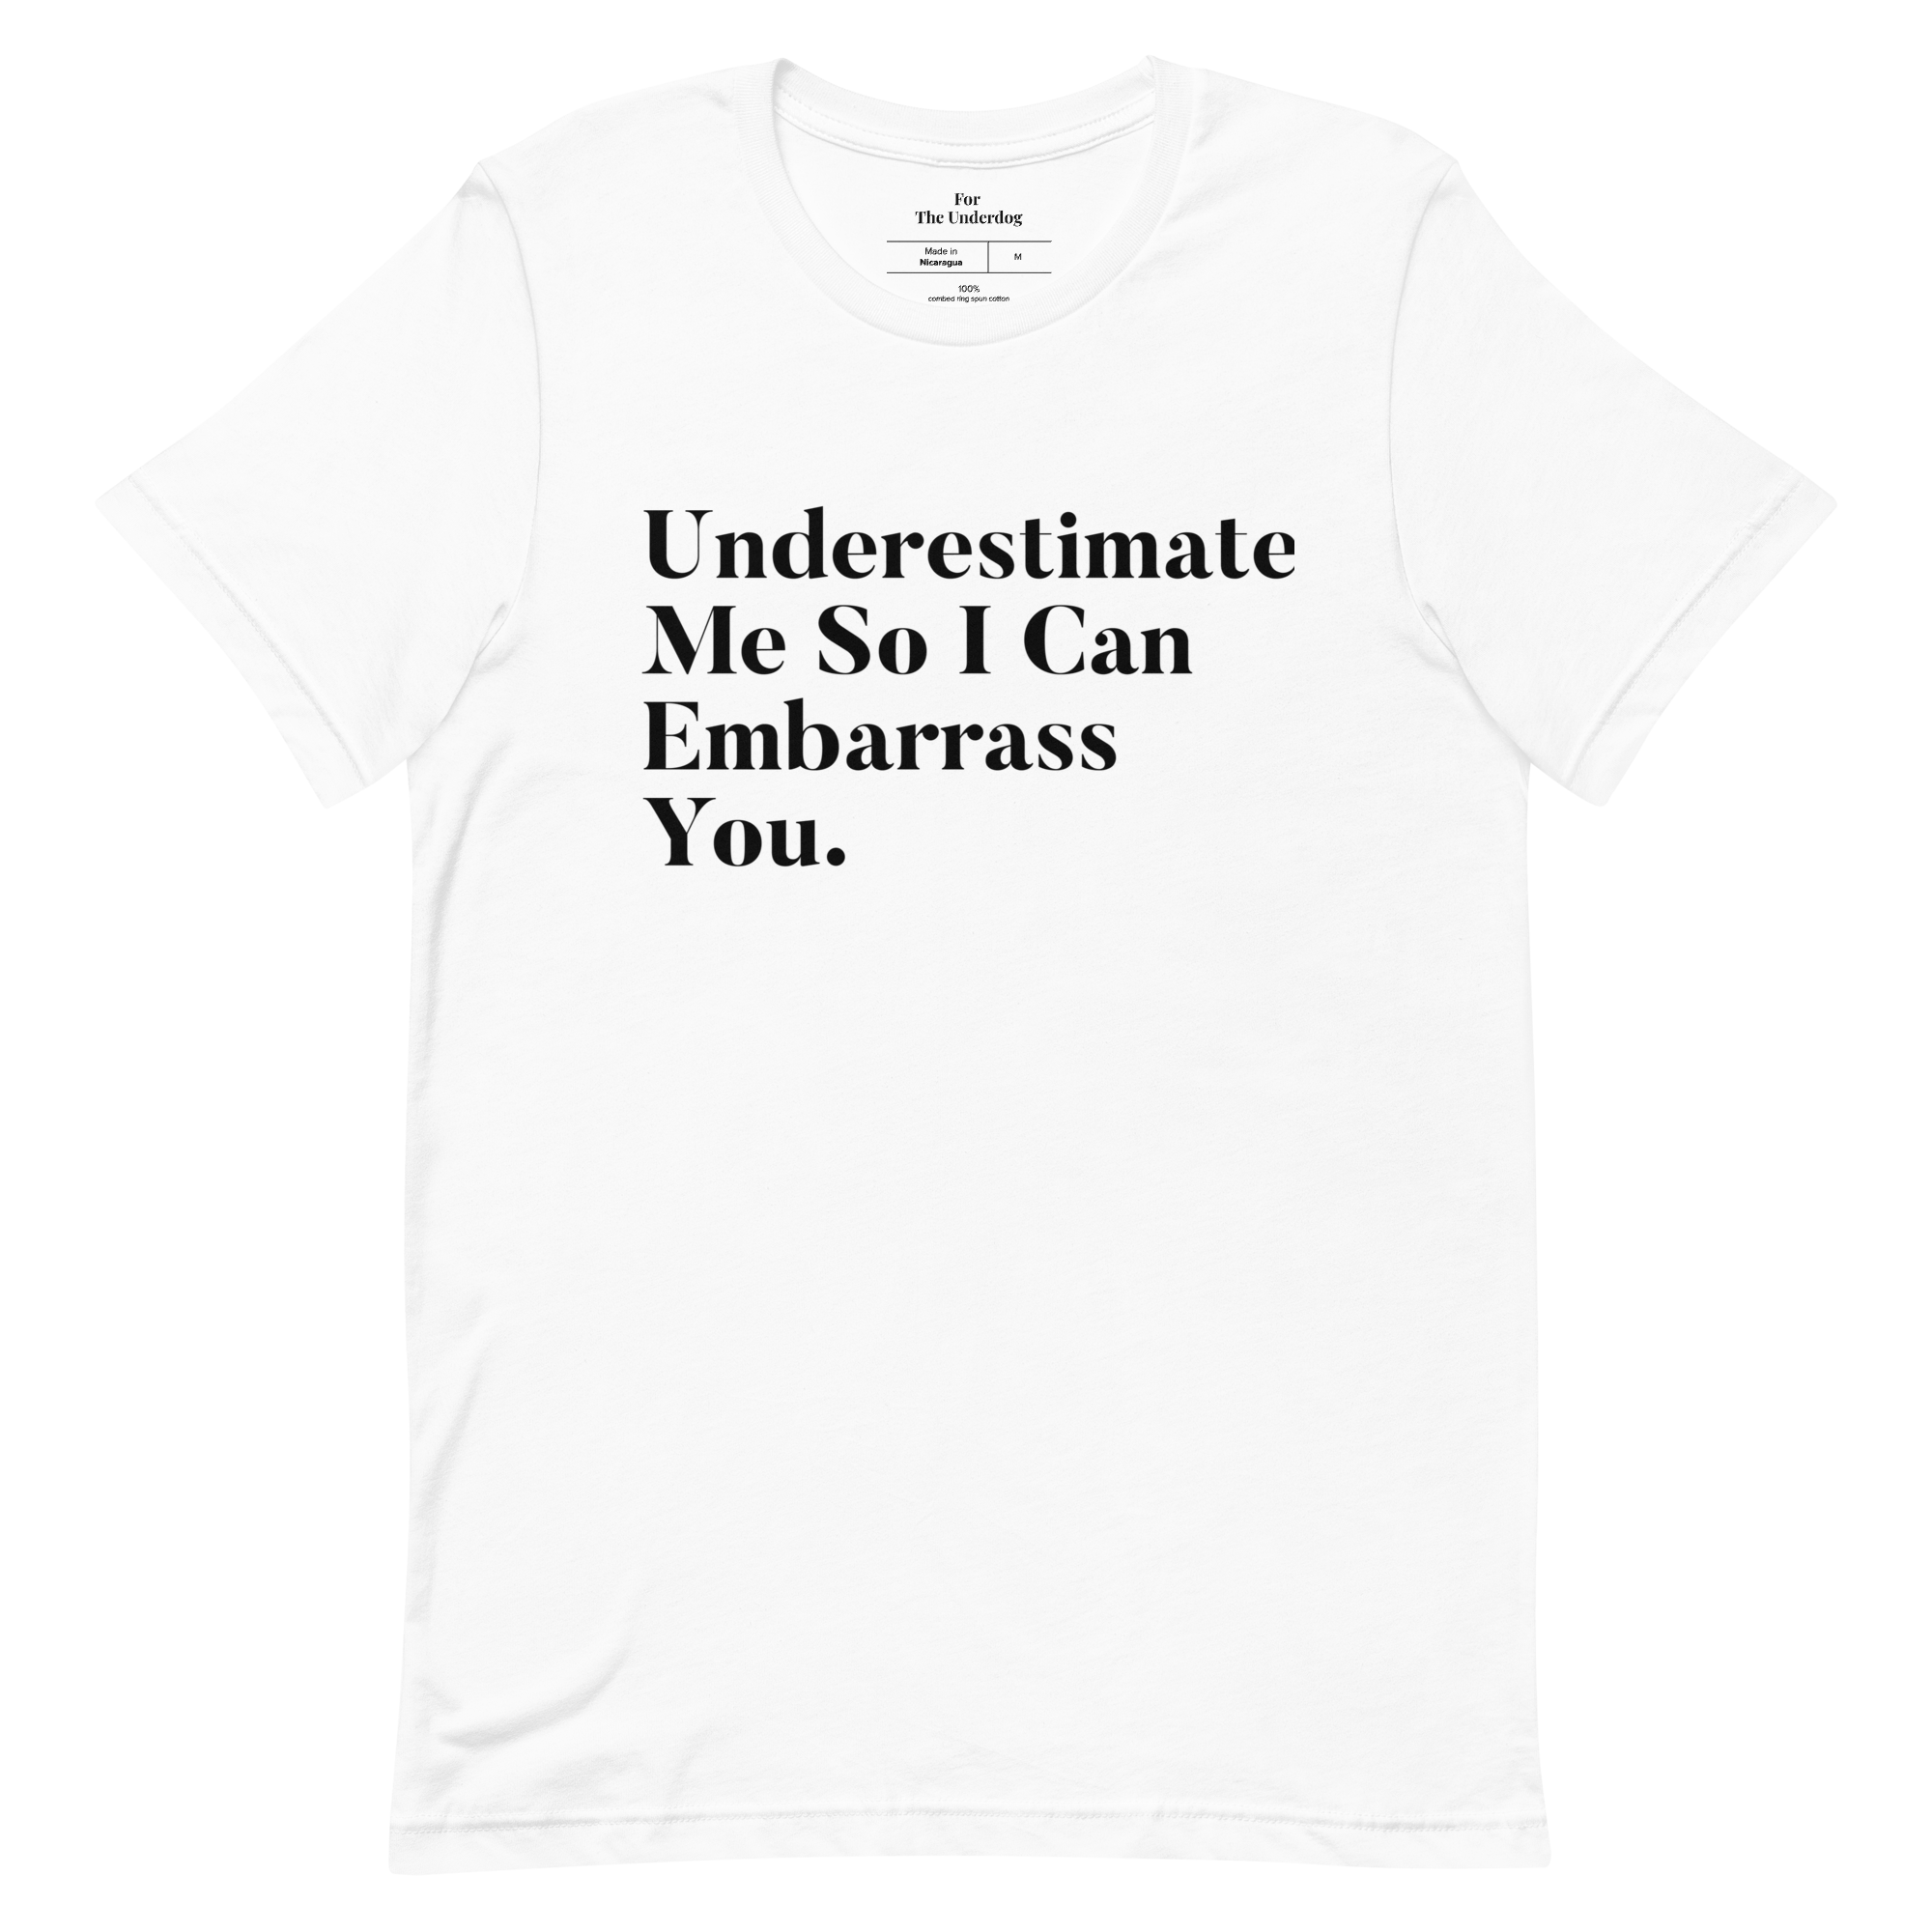 Underestimate Me So I Can Embarrass You.